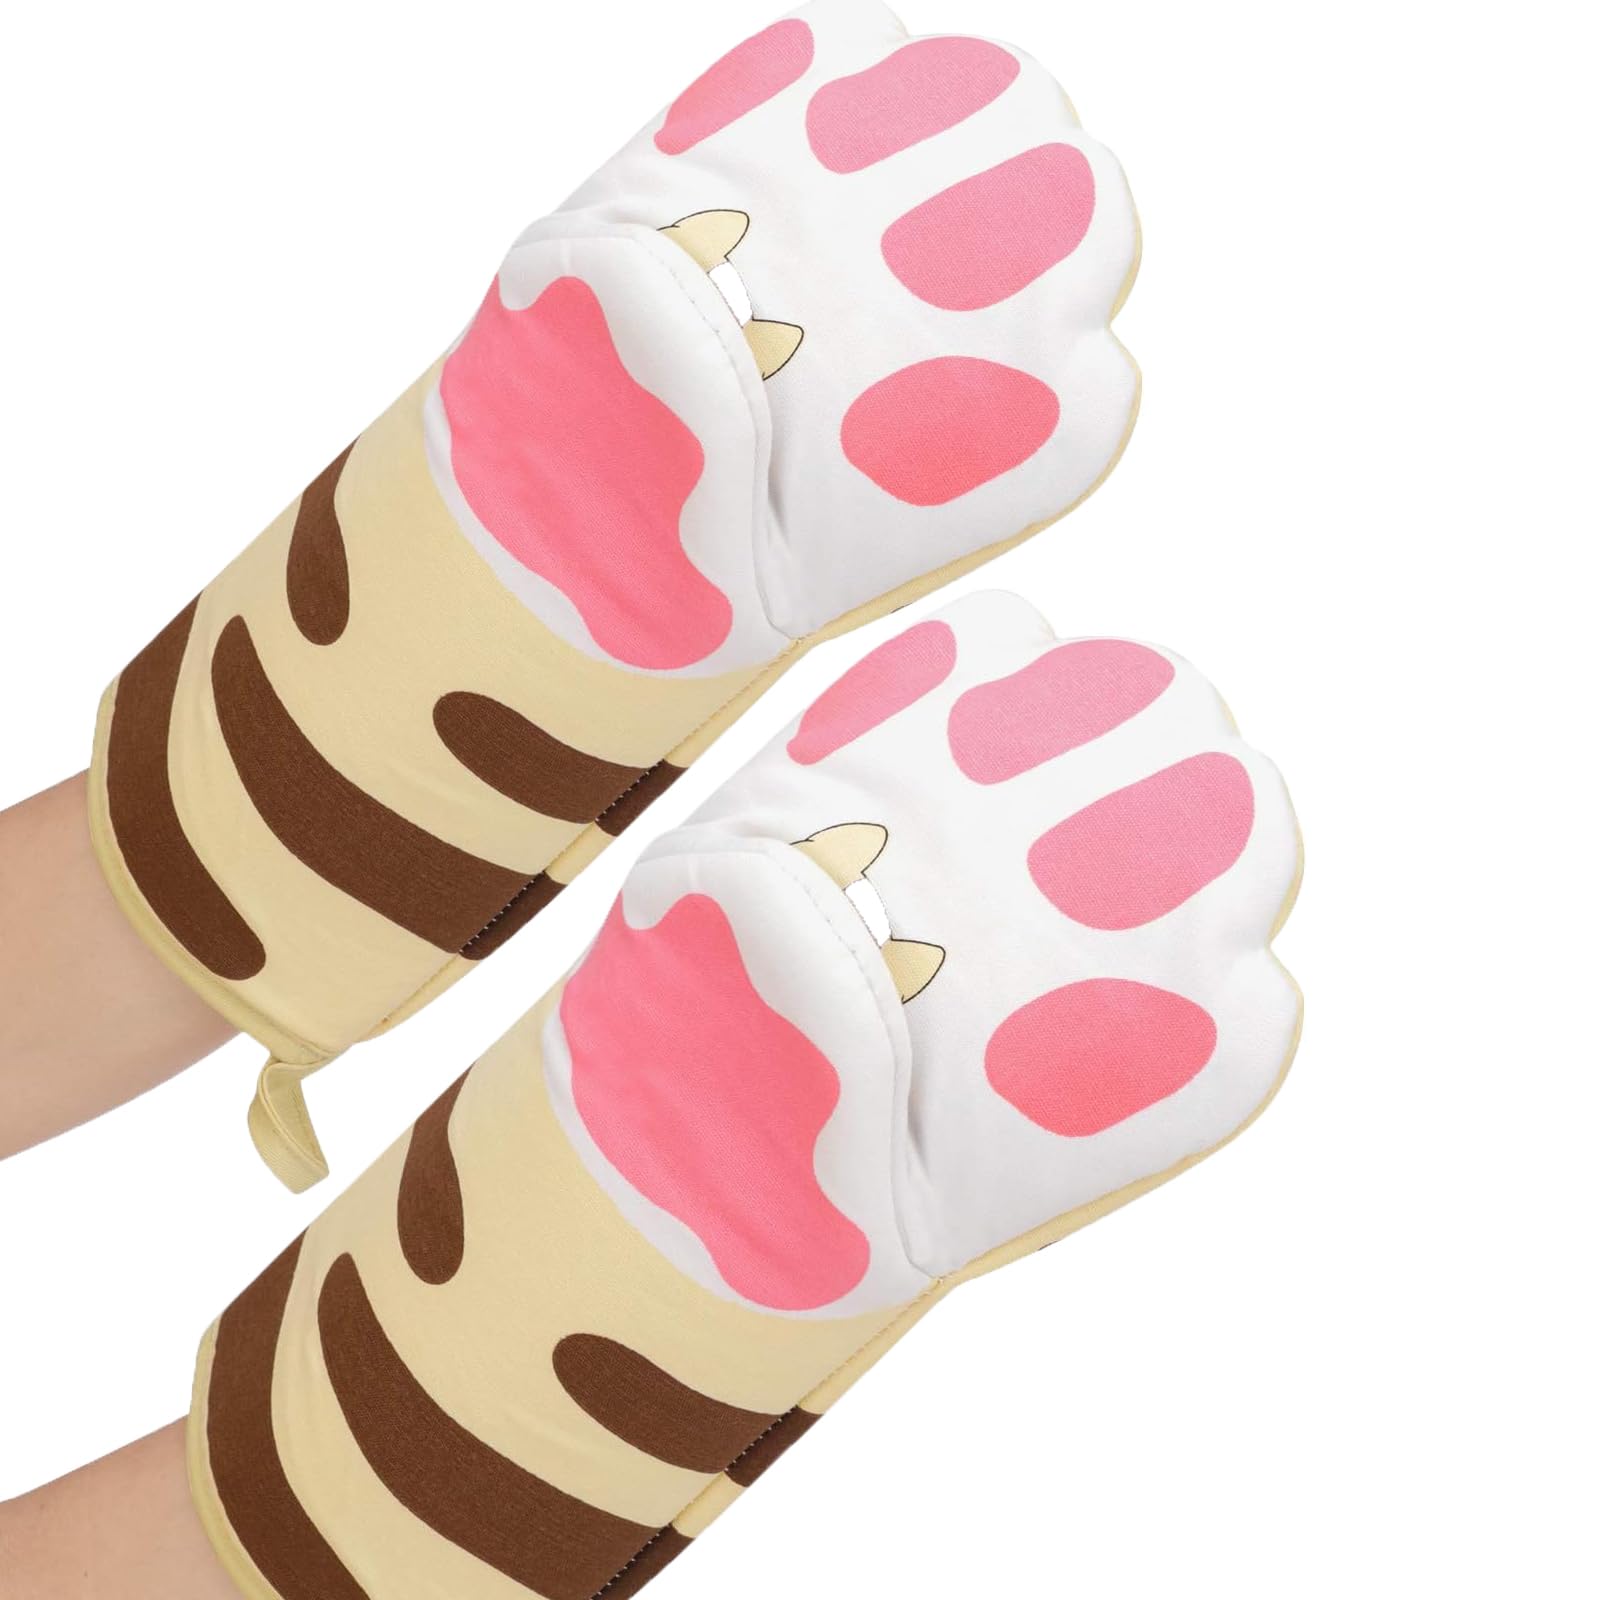 Cat Paw Oven Gloves with Roomy Thumb Long Sleeve Cat Kitchen Accessories for Christmas Cooking Baking